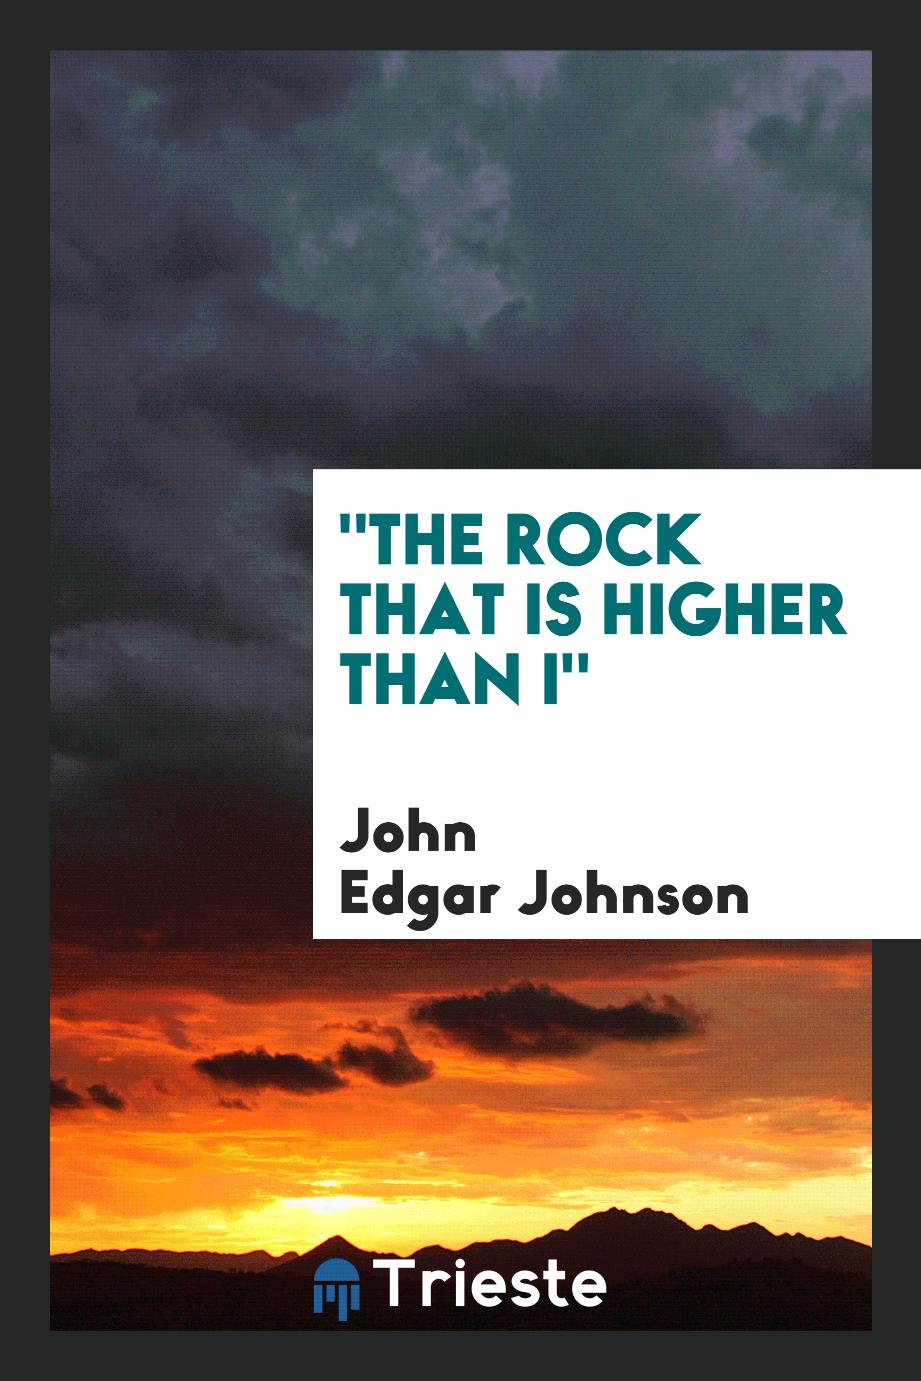 "The Rock that is Higher Than I"